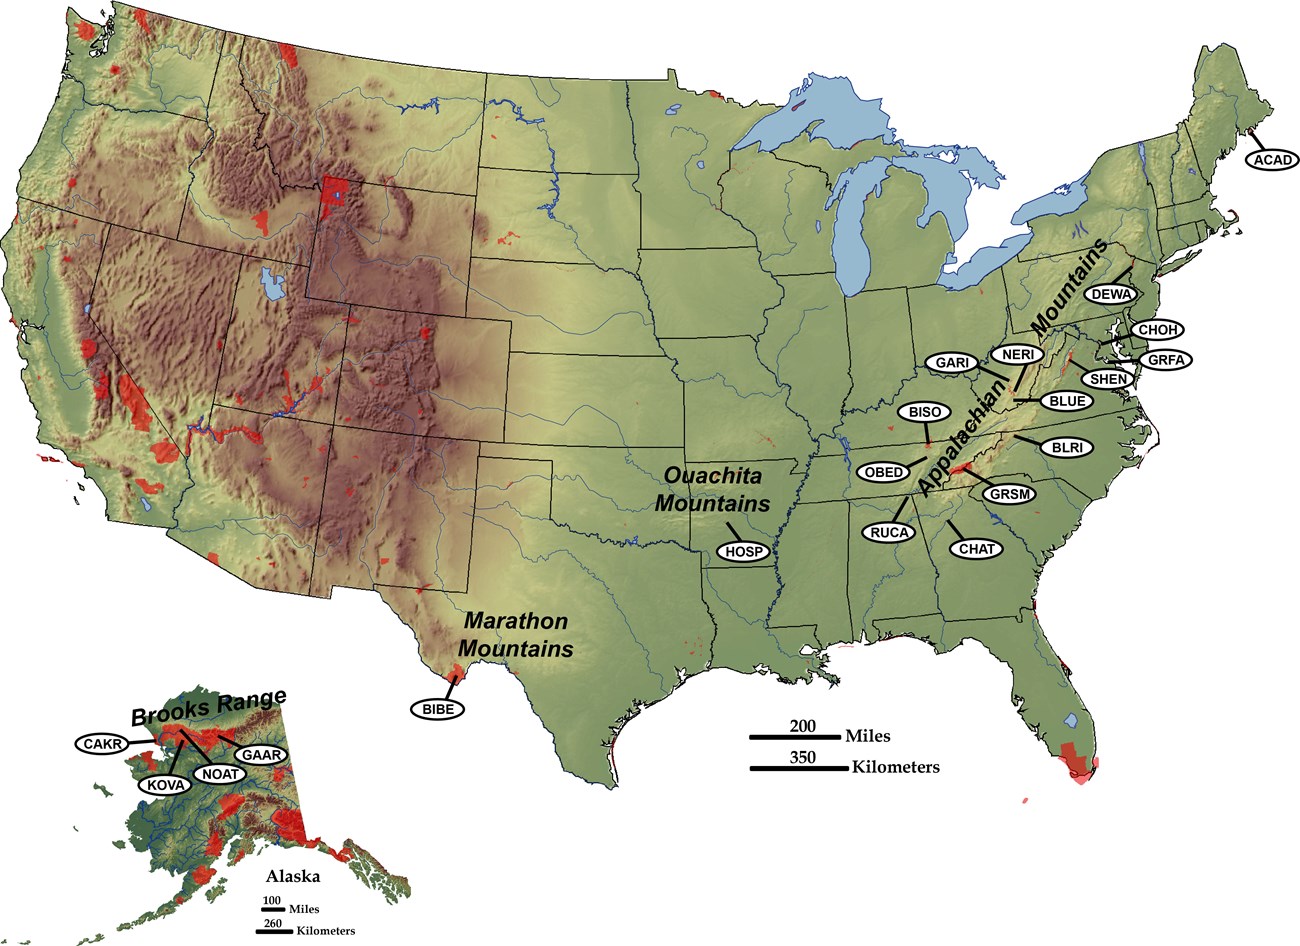 map of u.s. with parks in collisional mountain ranges marked and labeled